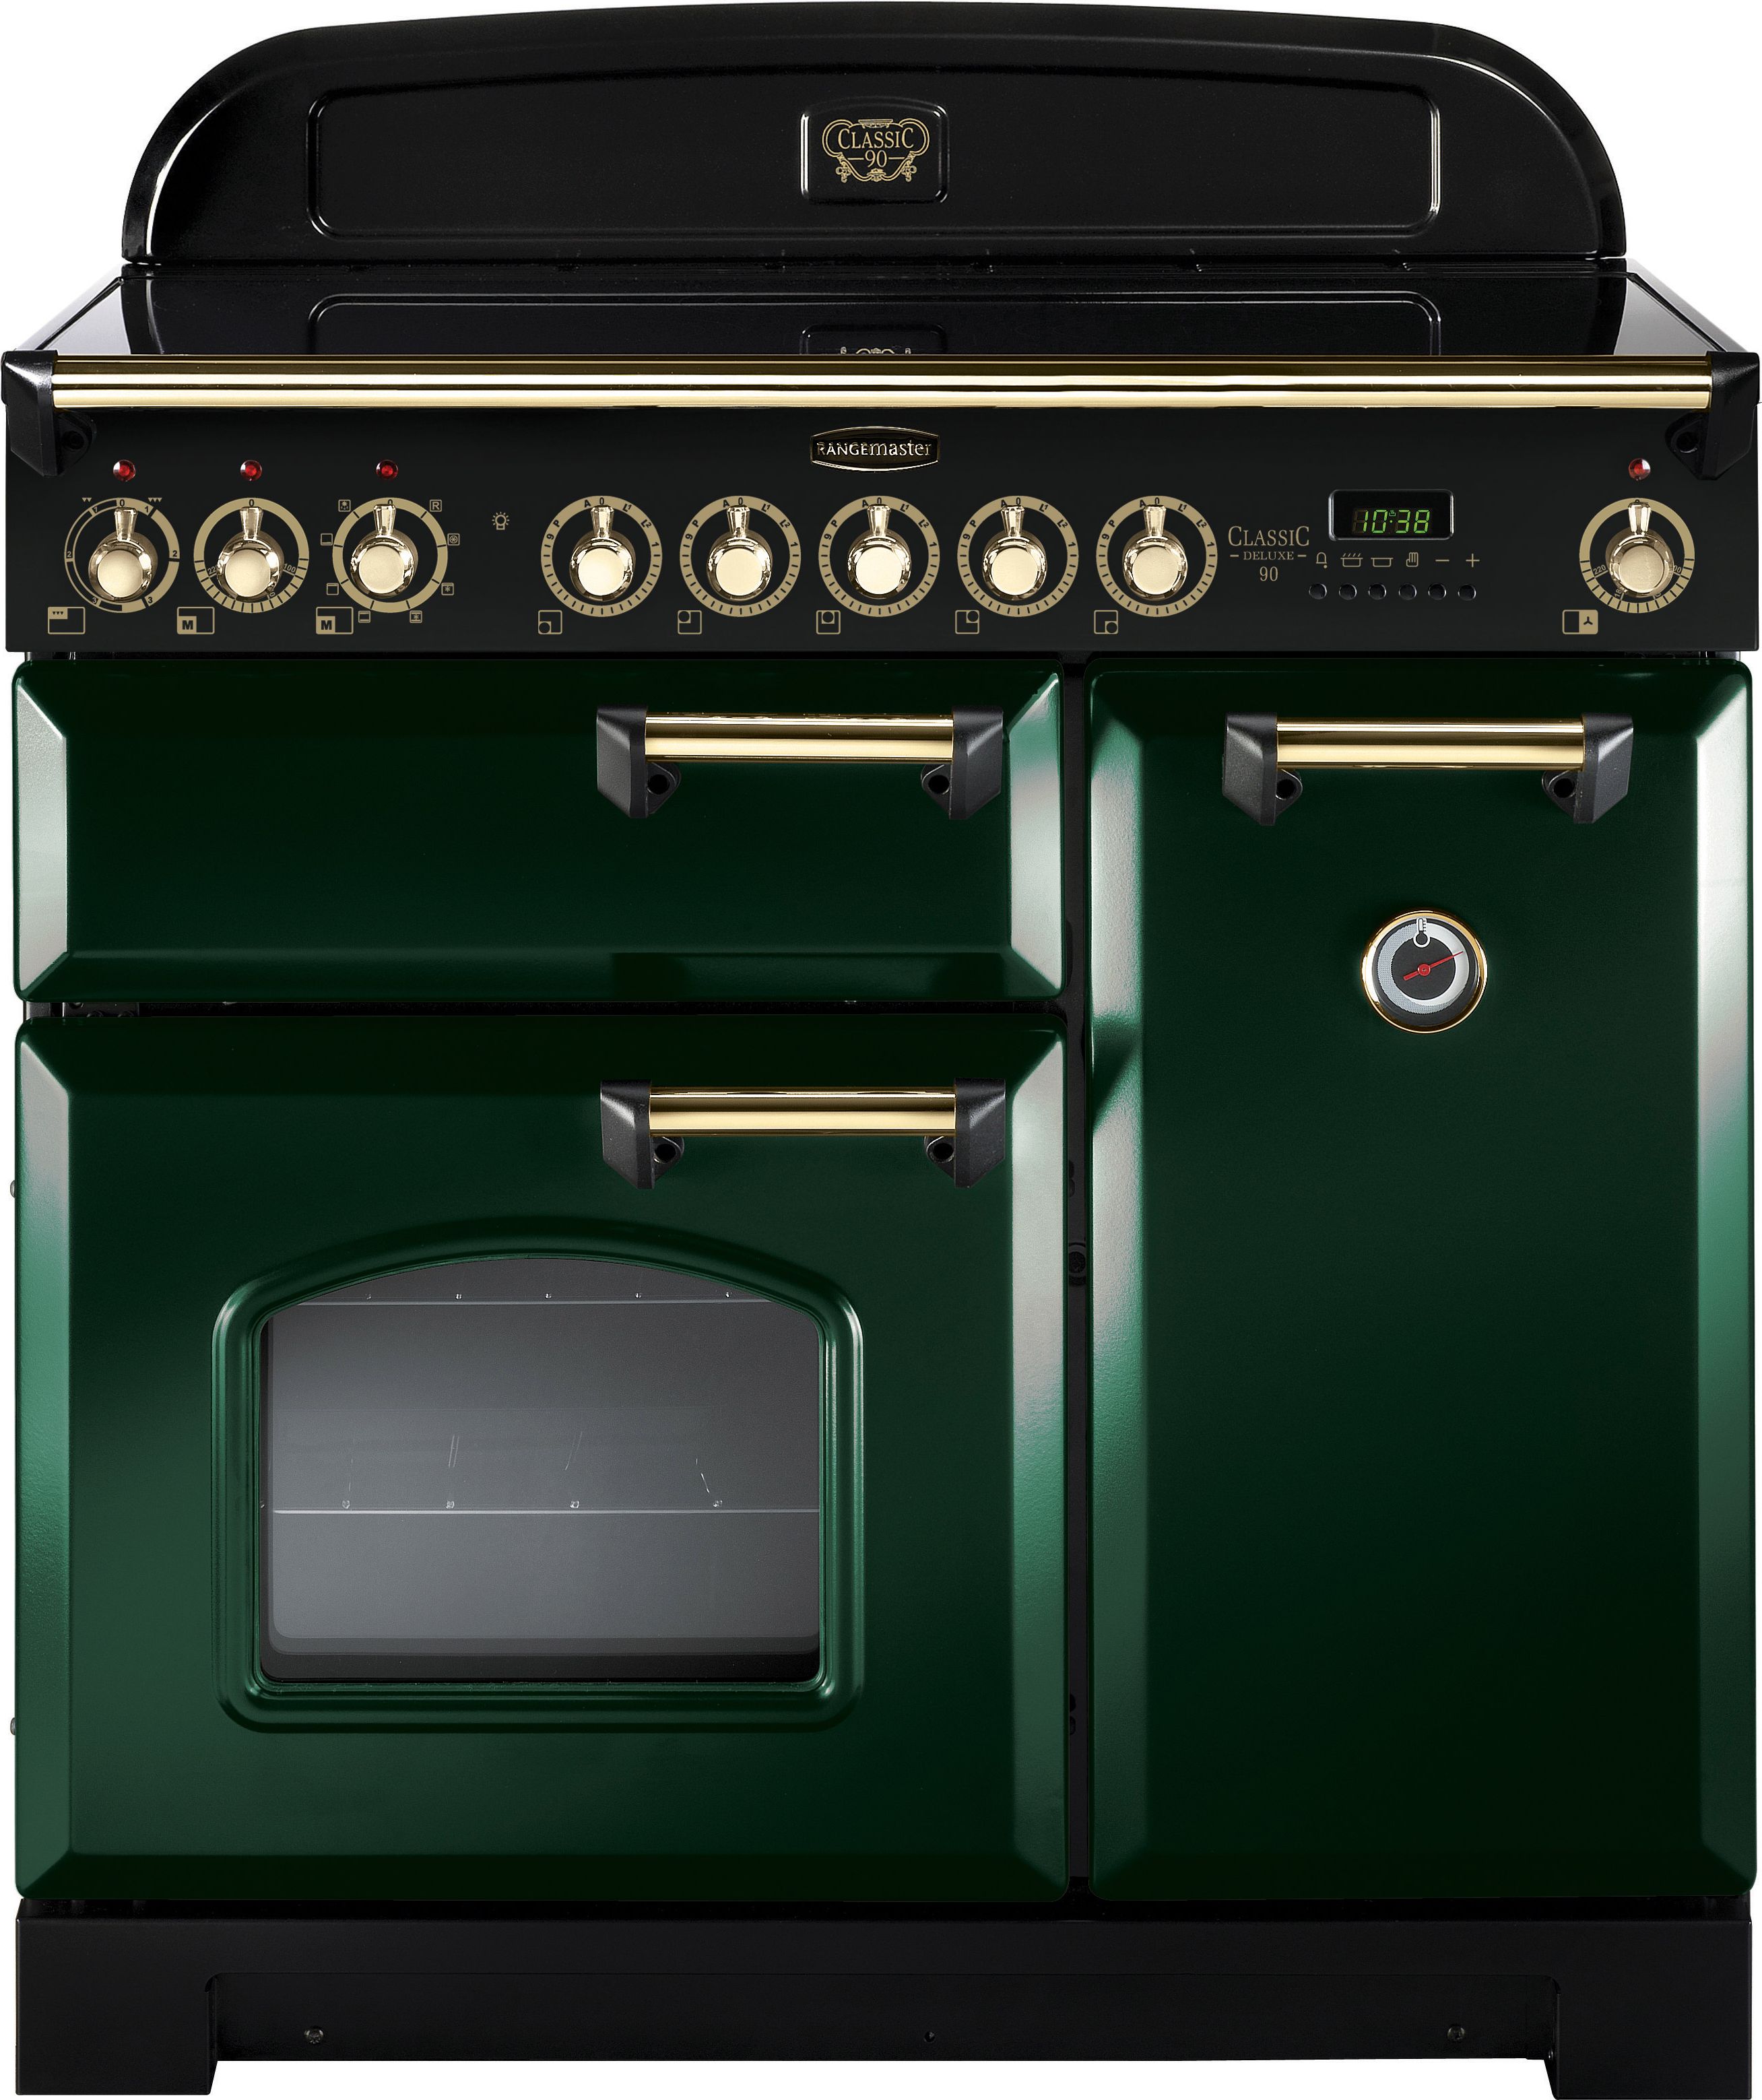 Rangemaster Classic Deluxe CDL90EIRG/B 90cm Electric Range Cooker with Induction Hob - Racing Green / Brass - A/A Rated, Green